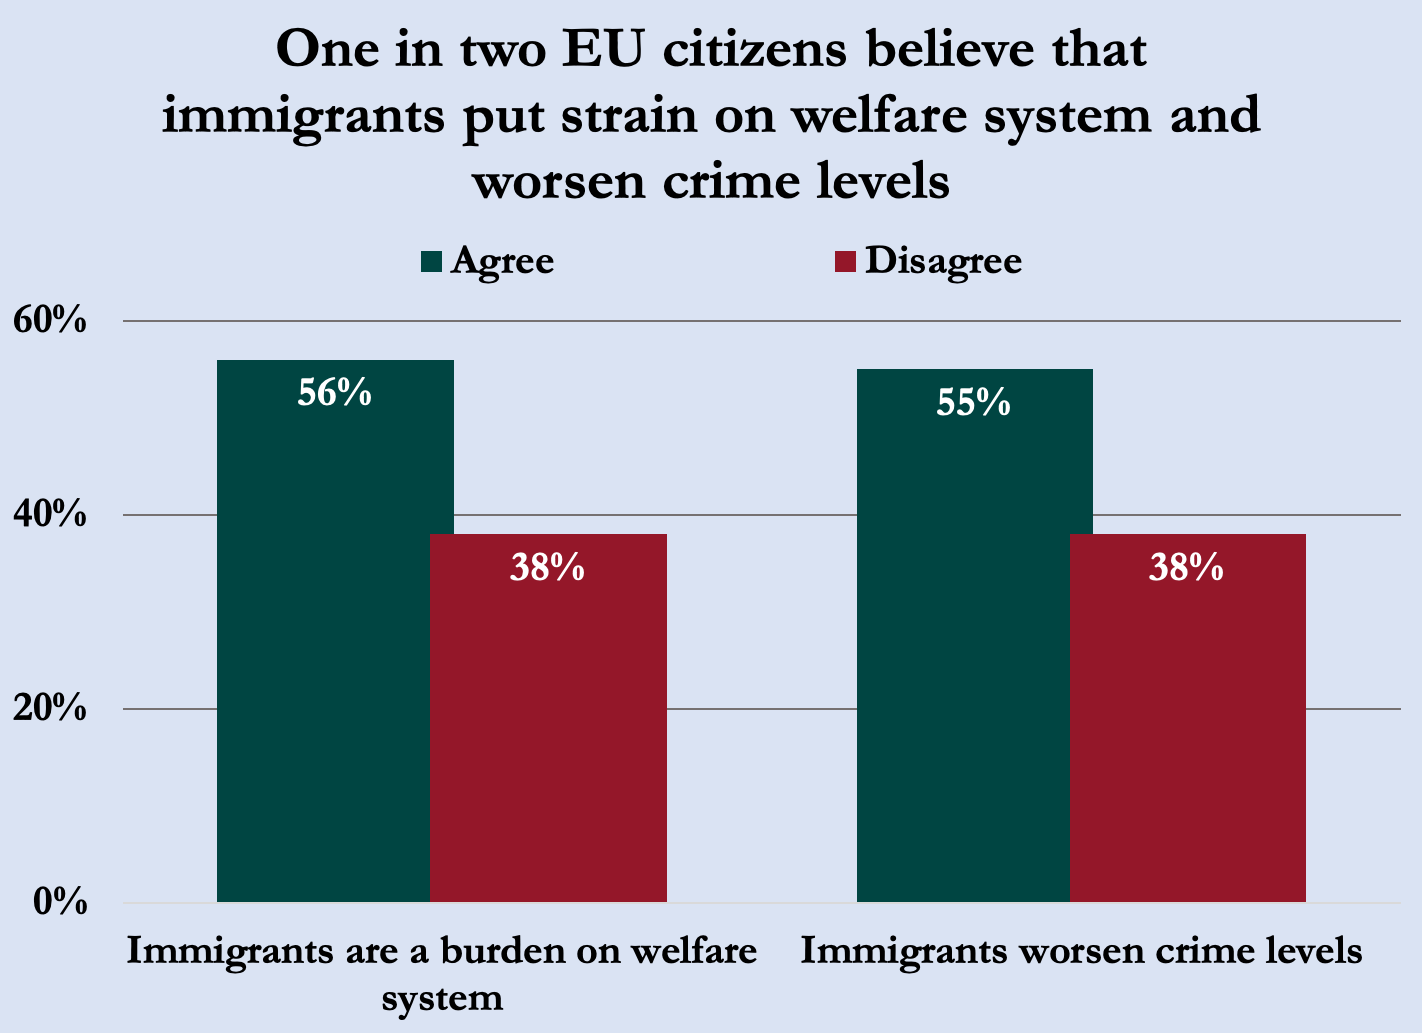 Perceived effect of immigrants on welfare system and crime levels